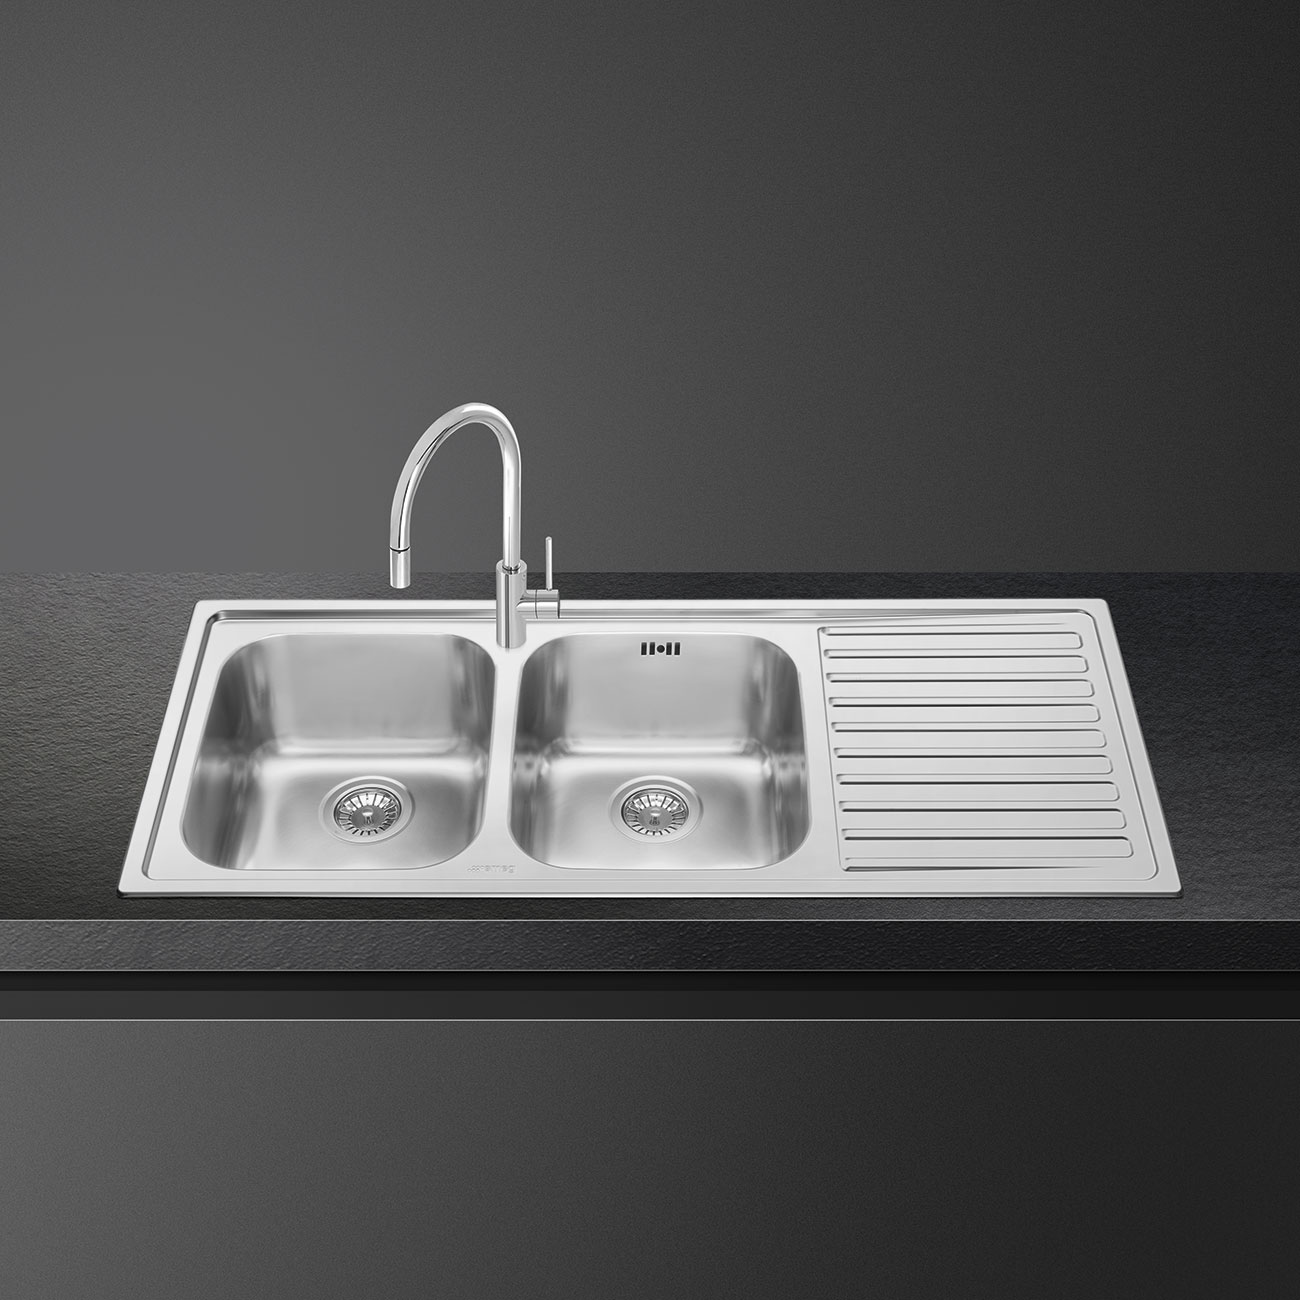 Sinks Smeg Technology With Style